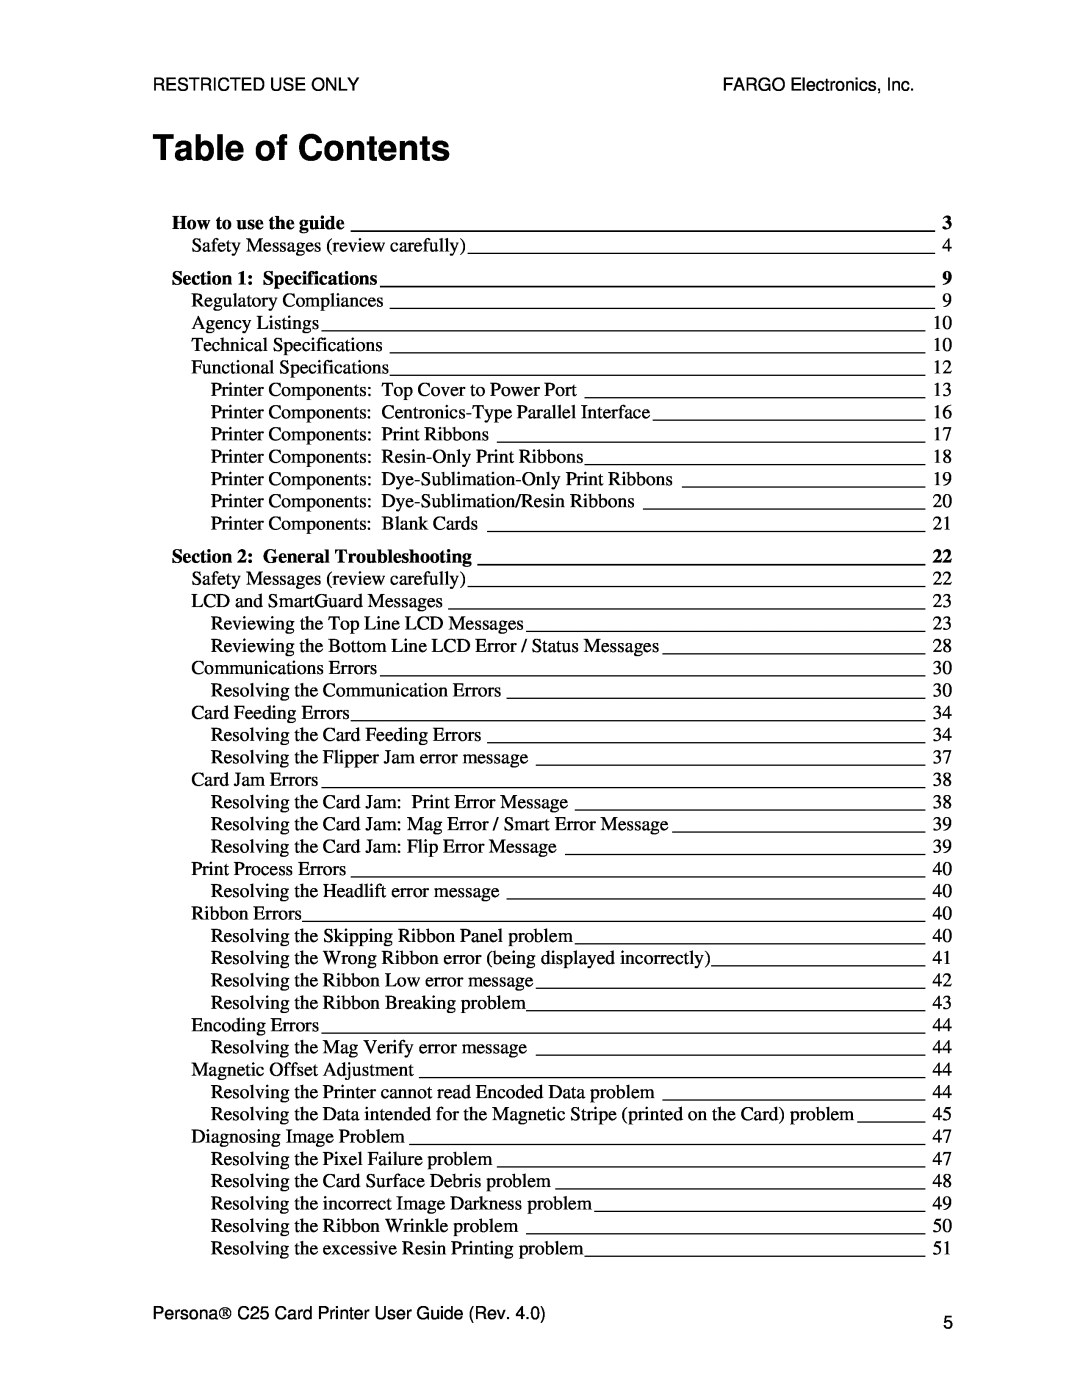 FARGO electronic S000256 manual Table of Contents, How to use the guide, Specifications, General Troubleshooting 